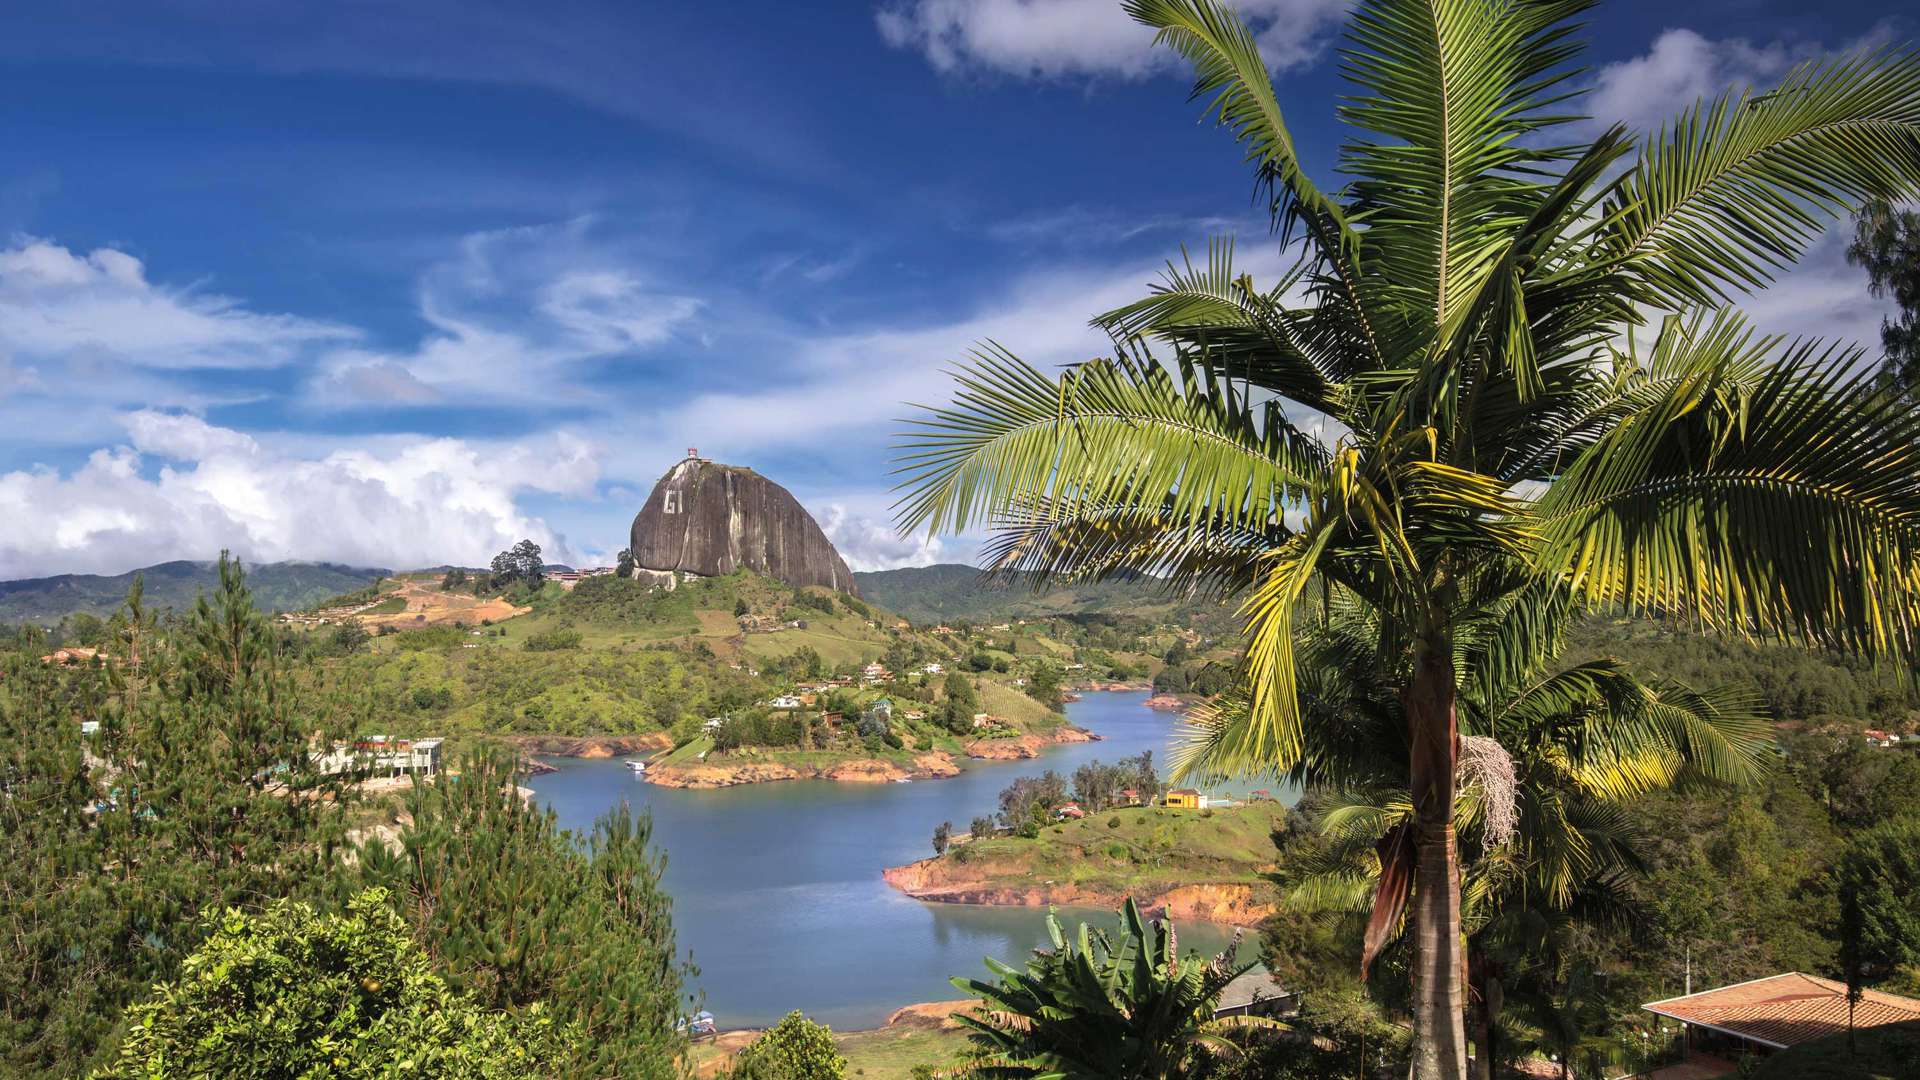 View Of The Rock El Penol Near The Town Of Guatape Antioquia, Colombia